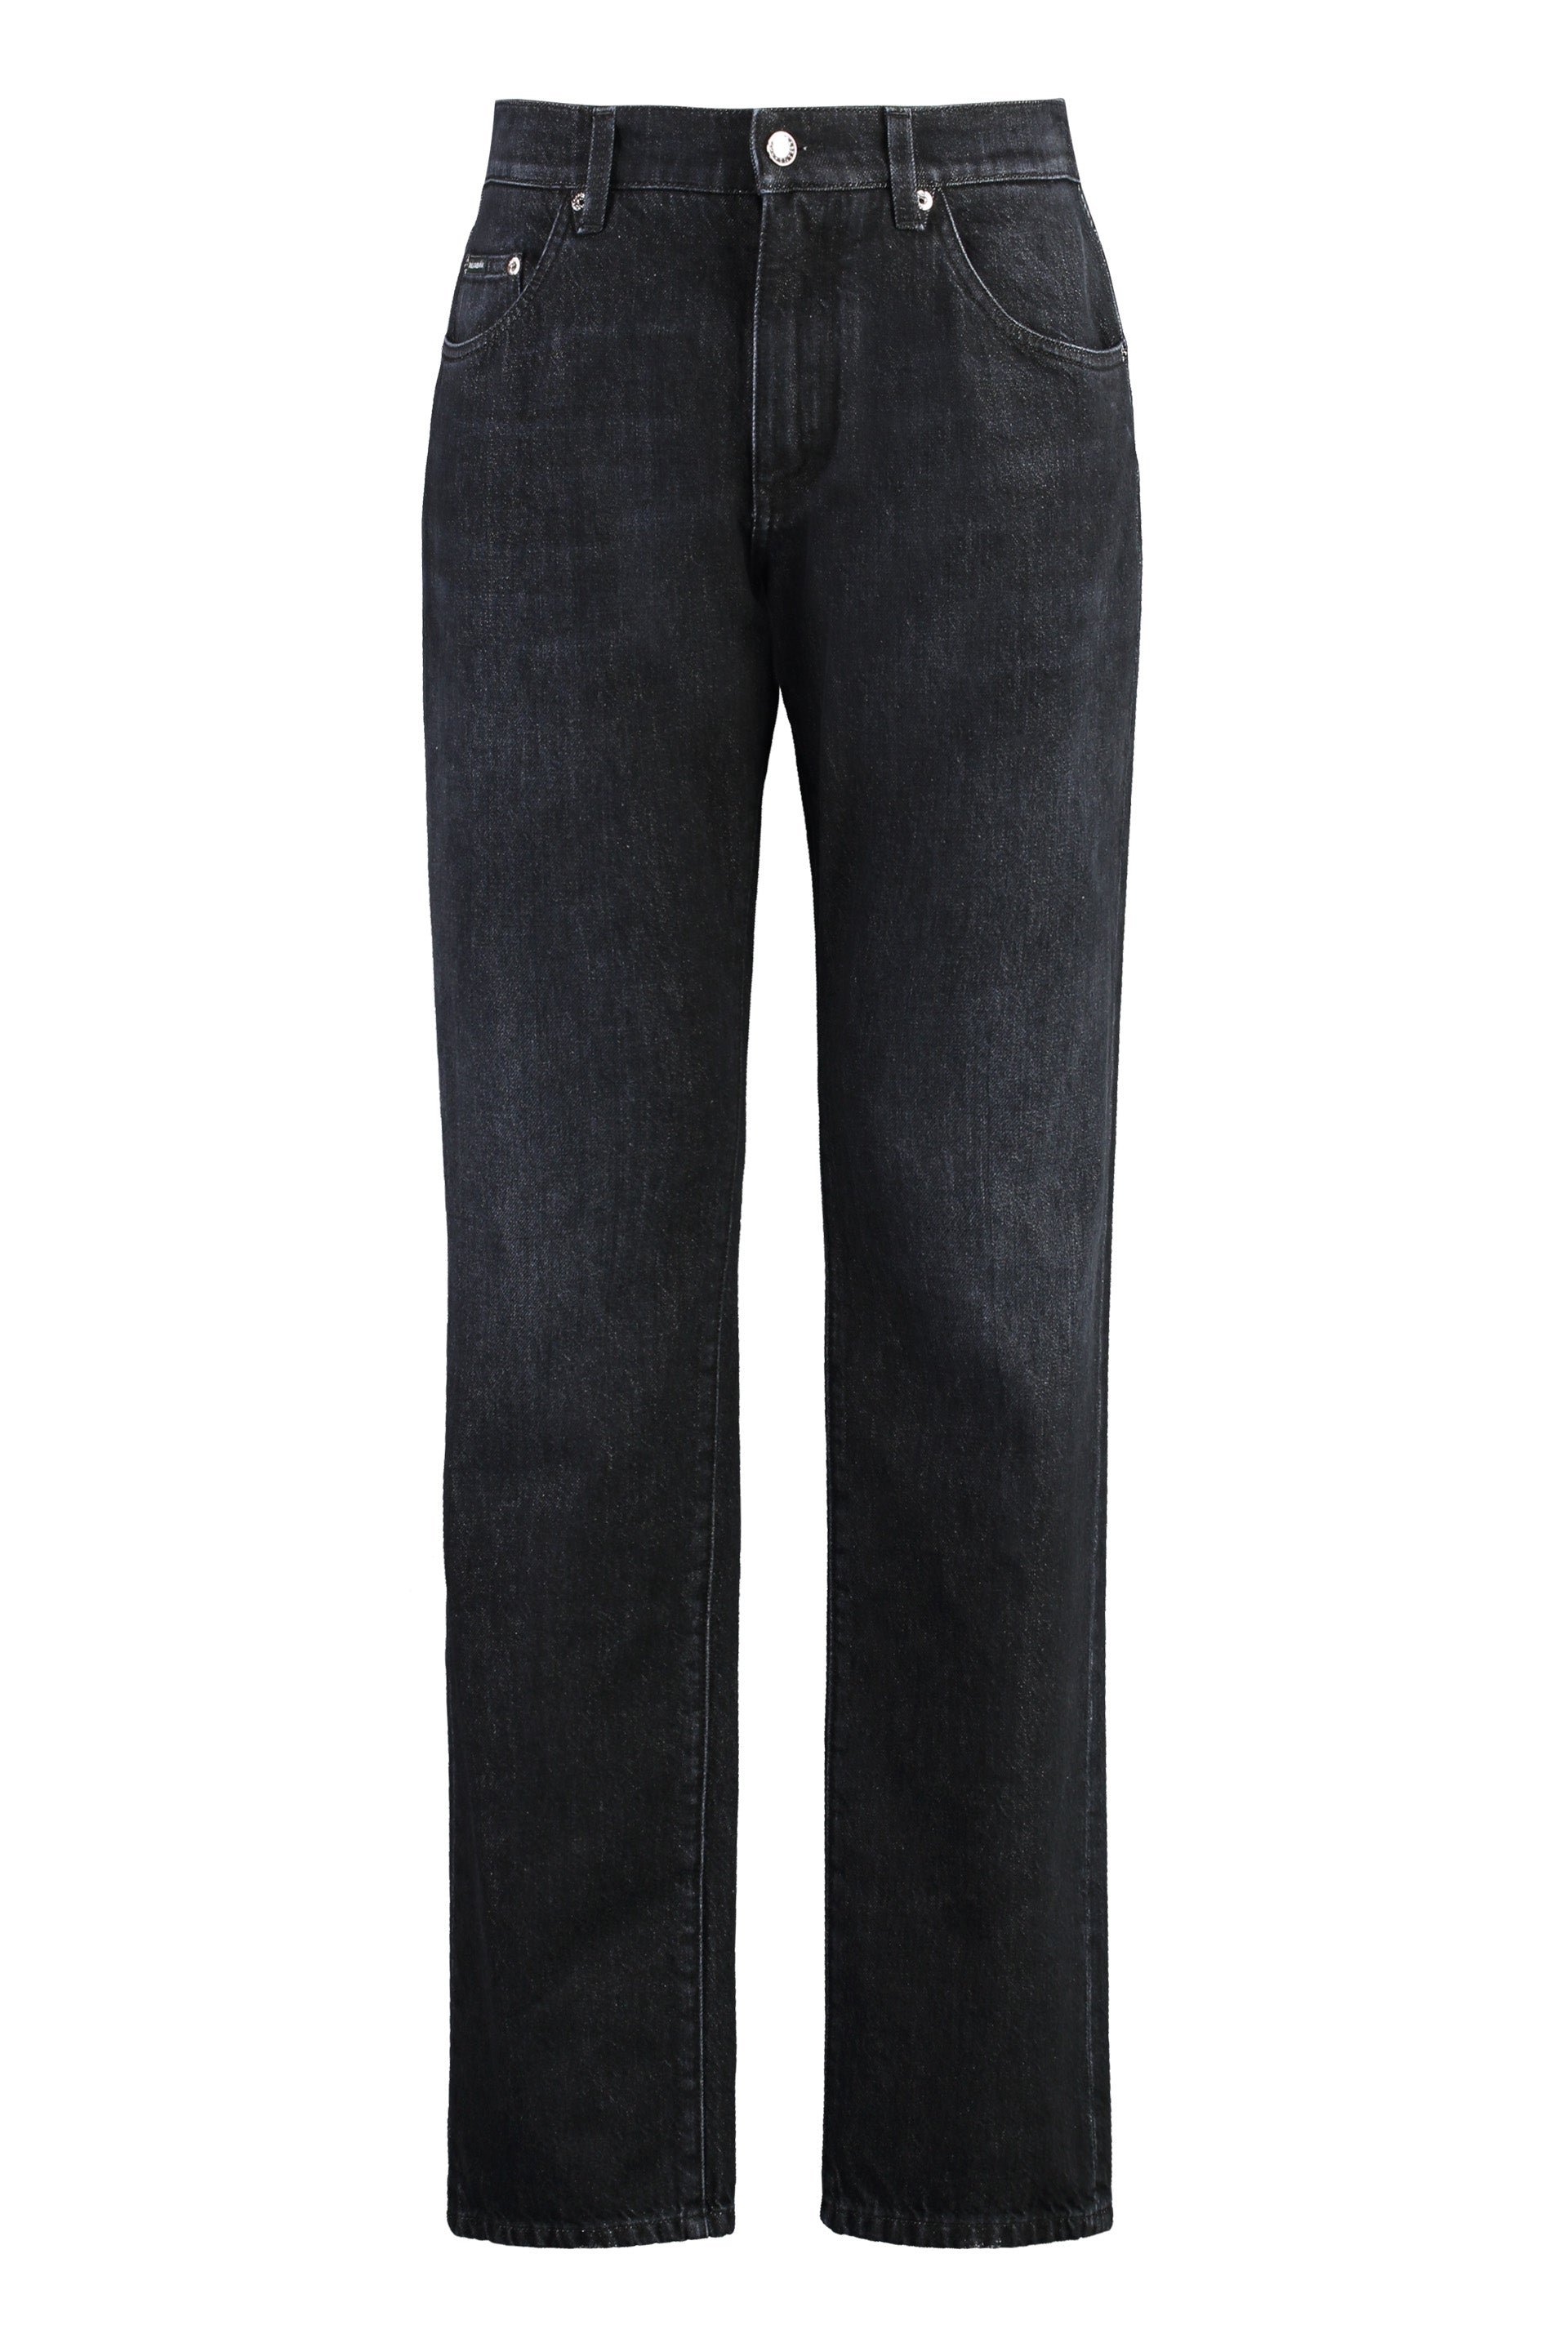 Shop Dolce & Gabbana Men's Black Straight-leg Jeans With Metal Accents And 100% Cotton Fabric